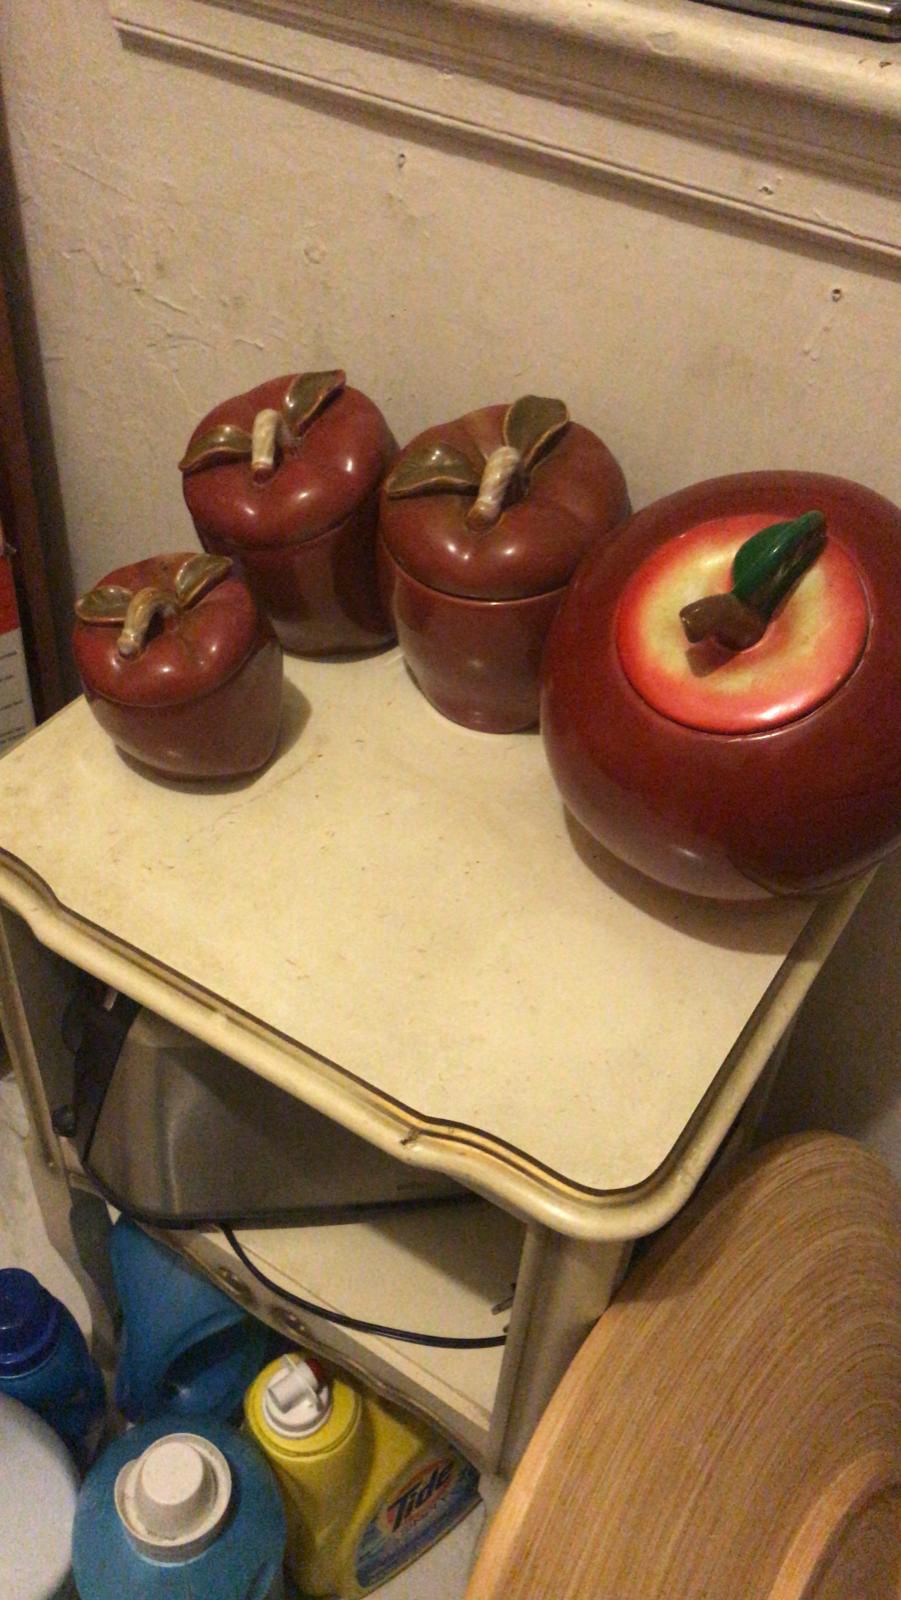 Apple kitchen canisters